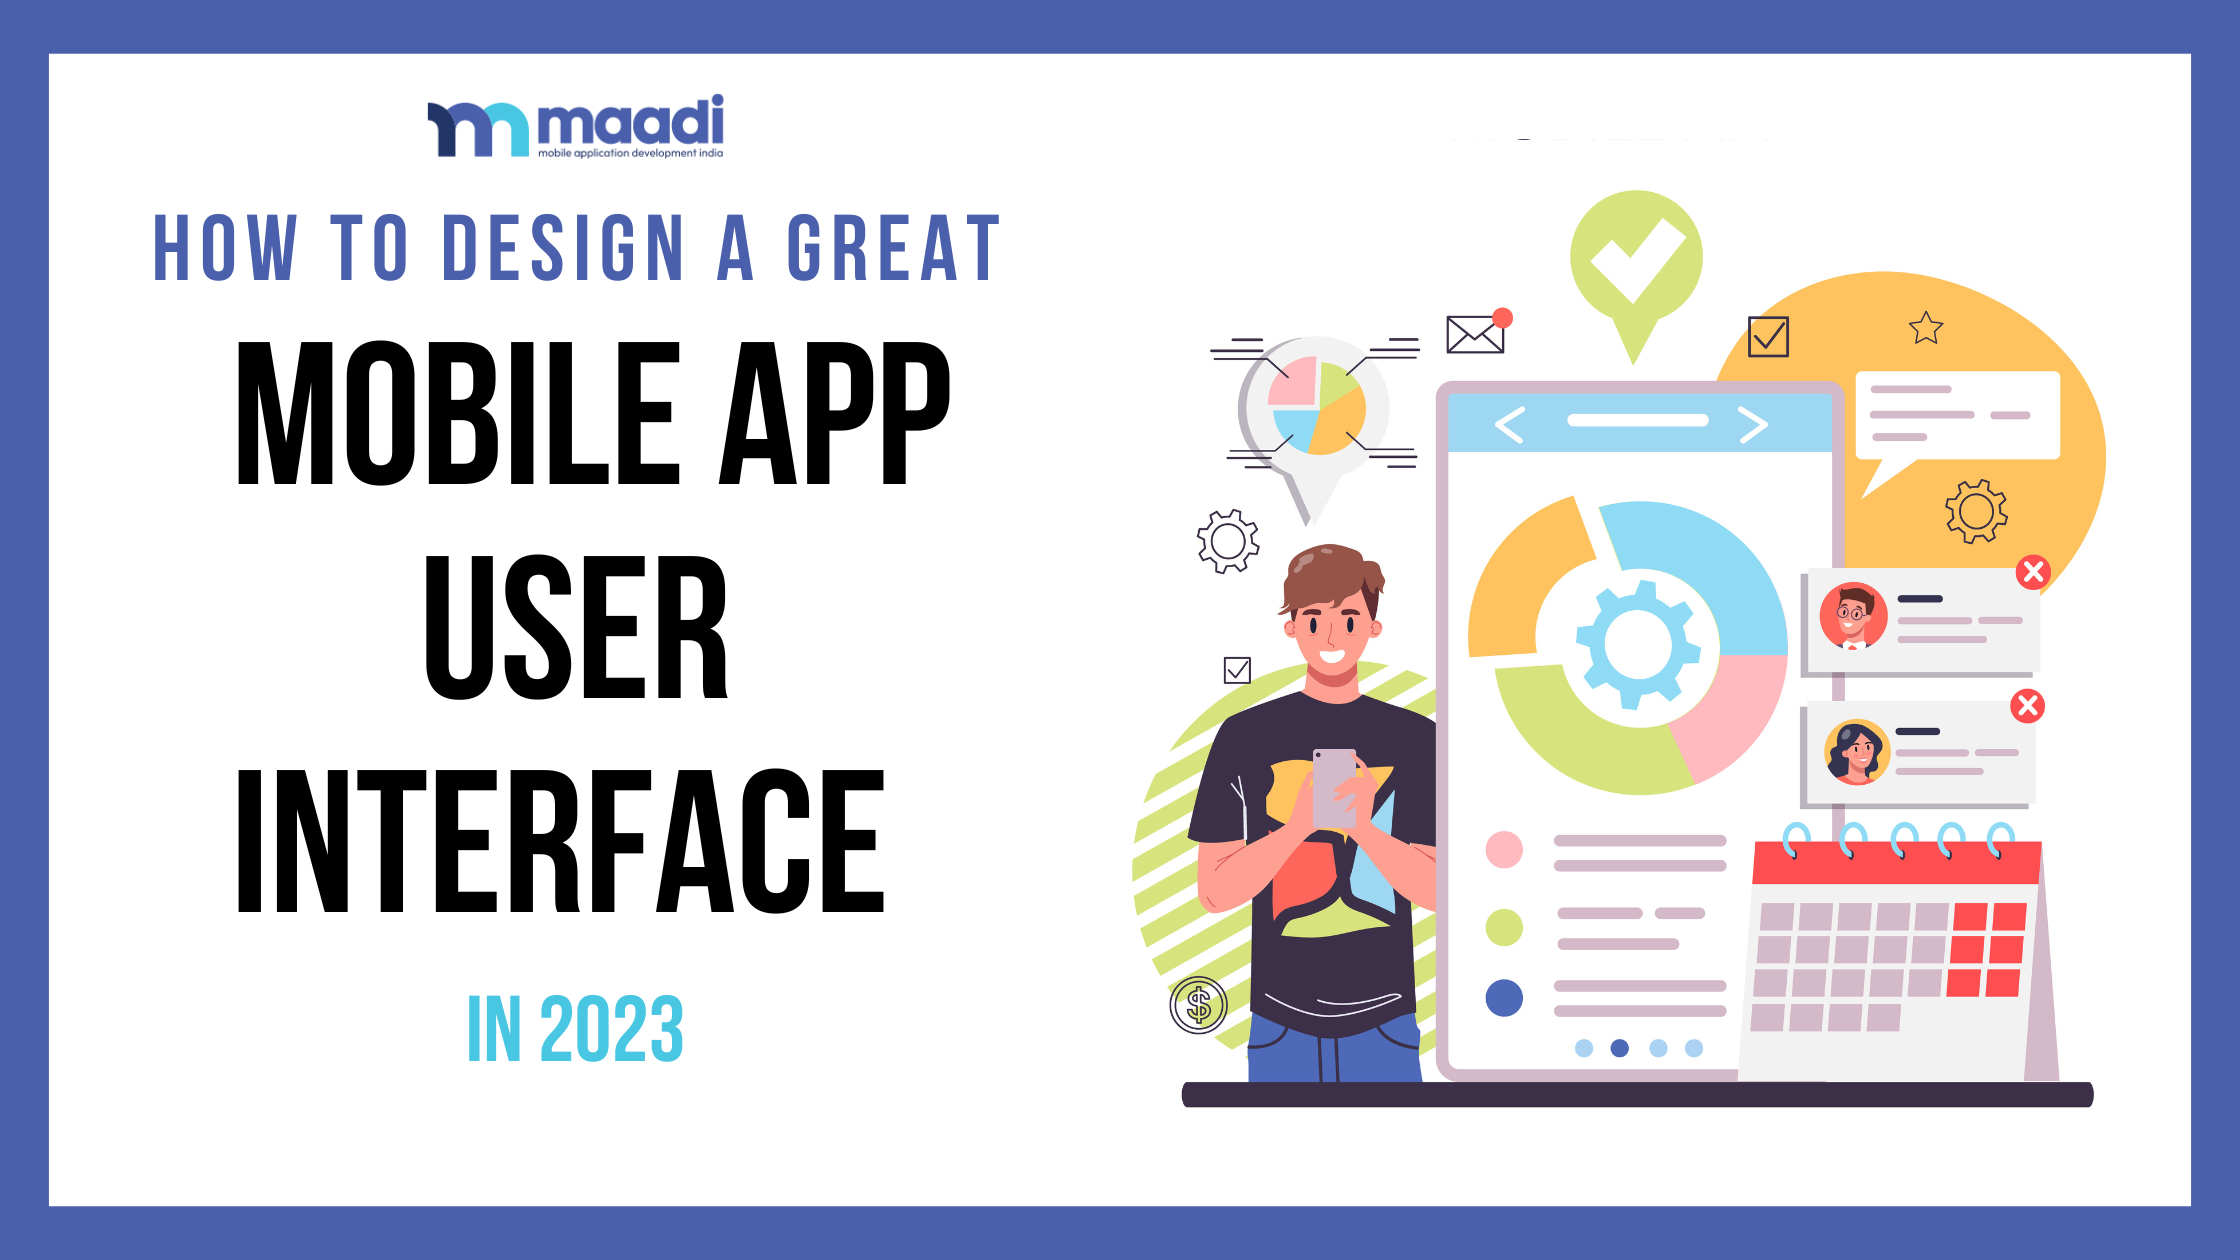 How to Design a Great Mobile App User Interface in 2023